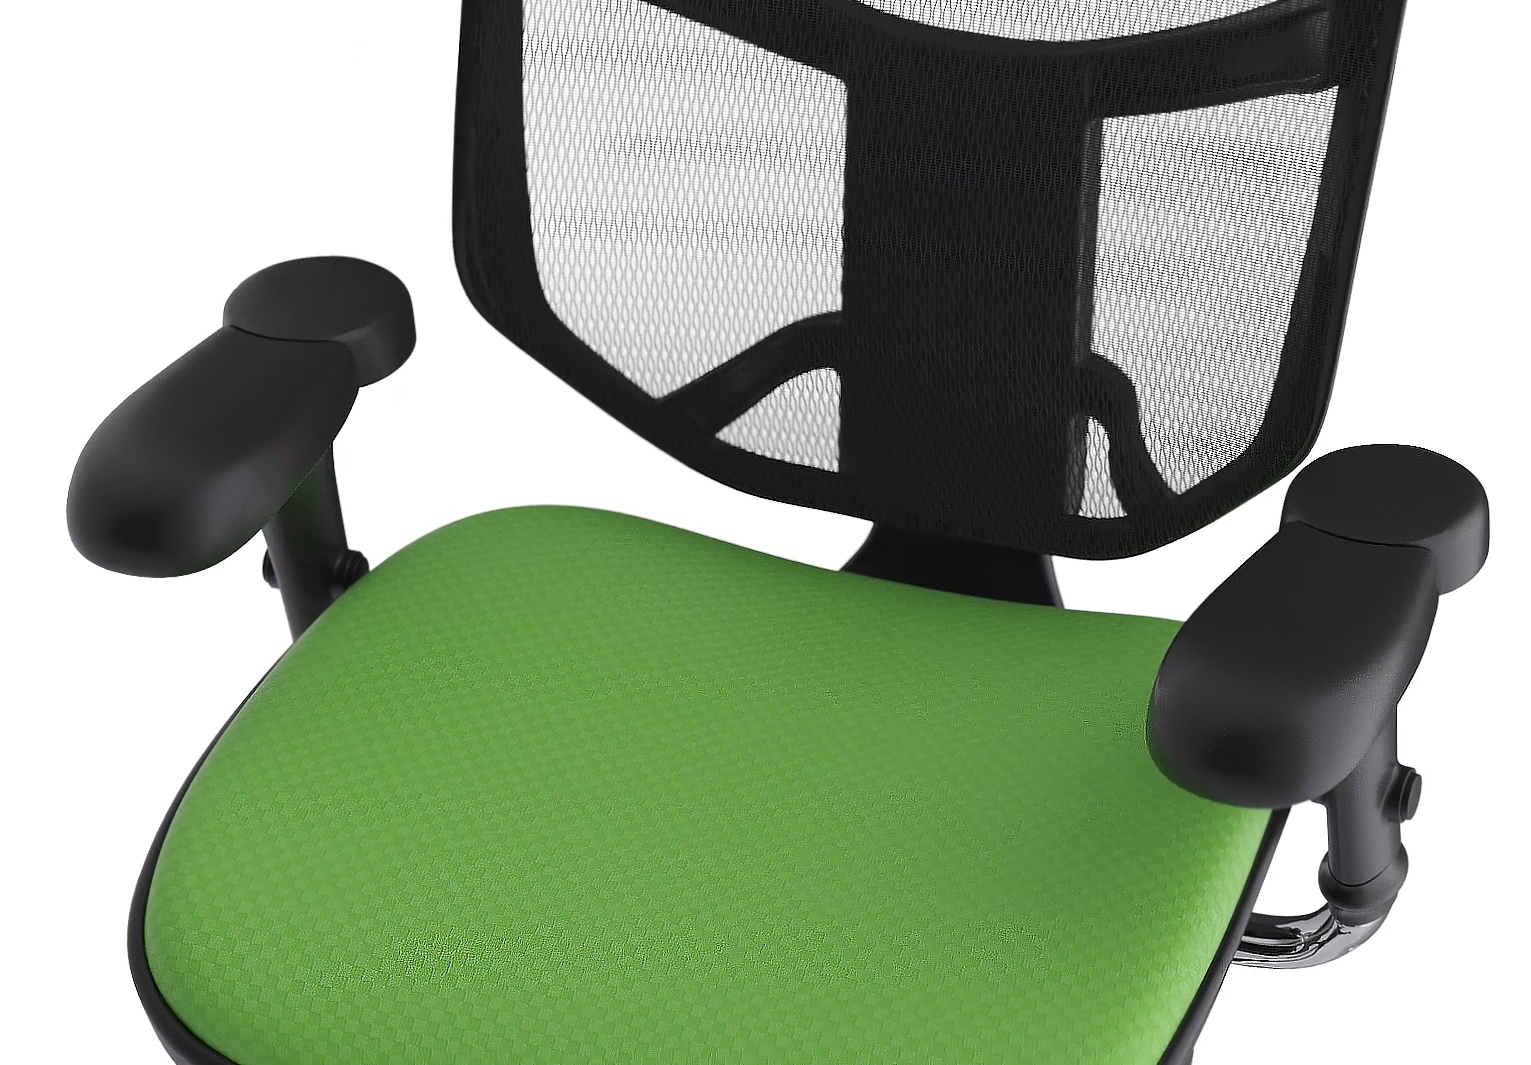 This image from Trinity's furniture animation displays the 3D rendered office chair that Trinity animators remodeled using 3D software for this instructional animation. This medium shot displays the seat, armrest, and part of the backrest all rendered with hyper realistic textures on a simple white background.